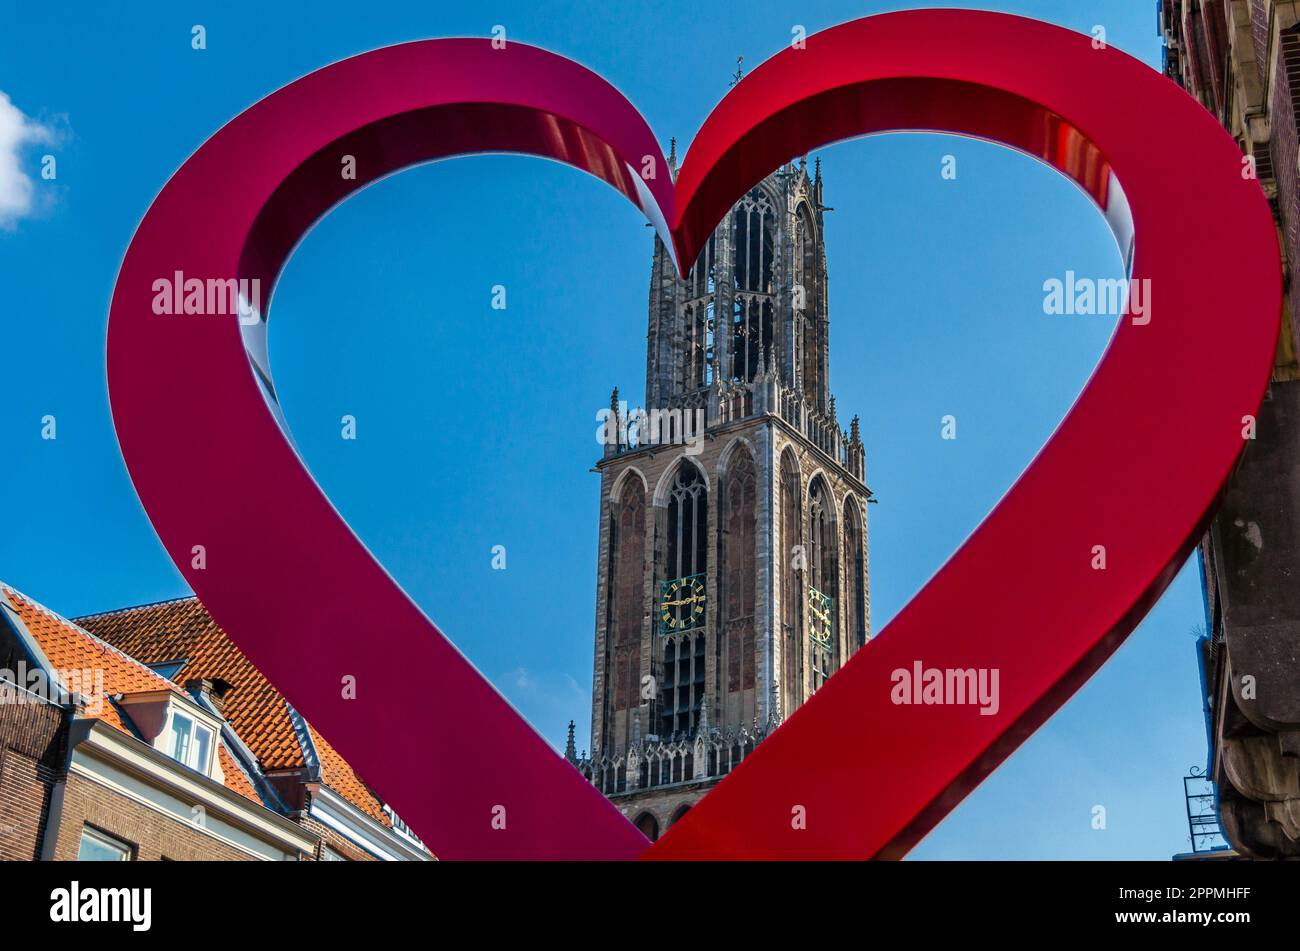 UTRECHT, THE NETHERLANDS - AUGUST 23, 2013: Sculpture 'The Art of Making Peace', consists of two swords forming a heart, placed in Utrecht in 2013 to commemorate 300 years from the signing of the Treaty of Utrecht (1713) Stock Photo